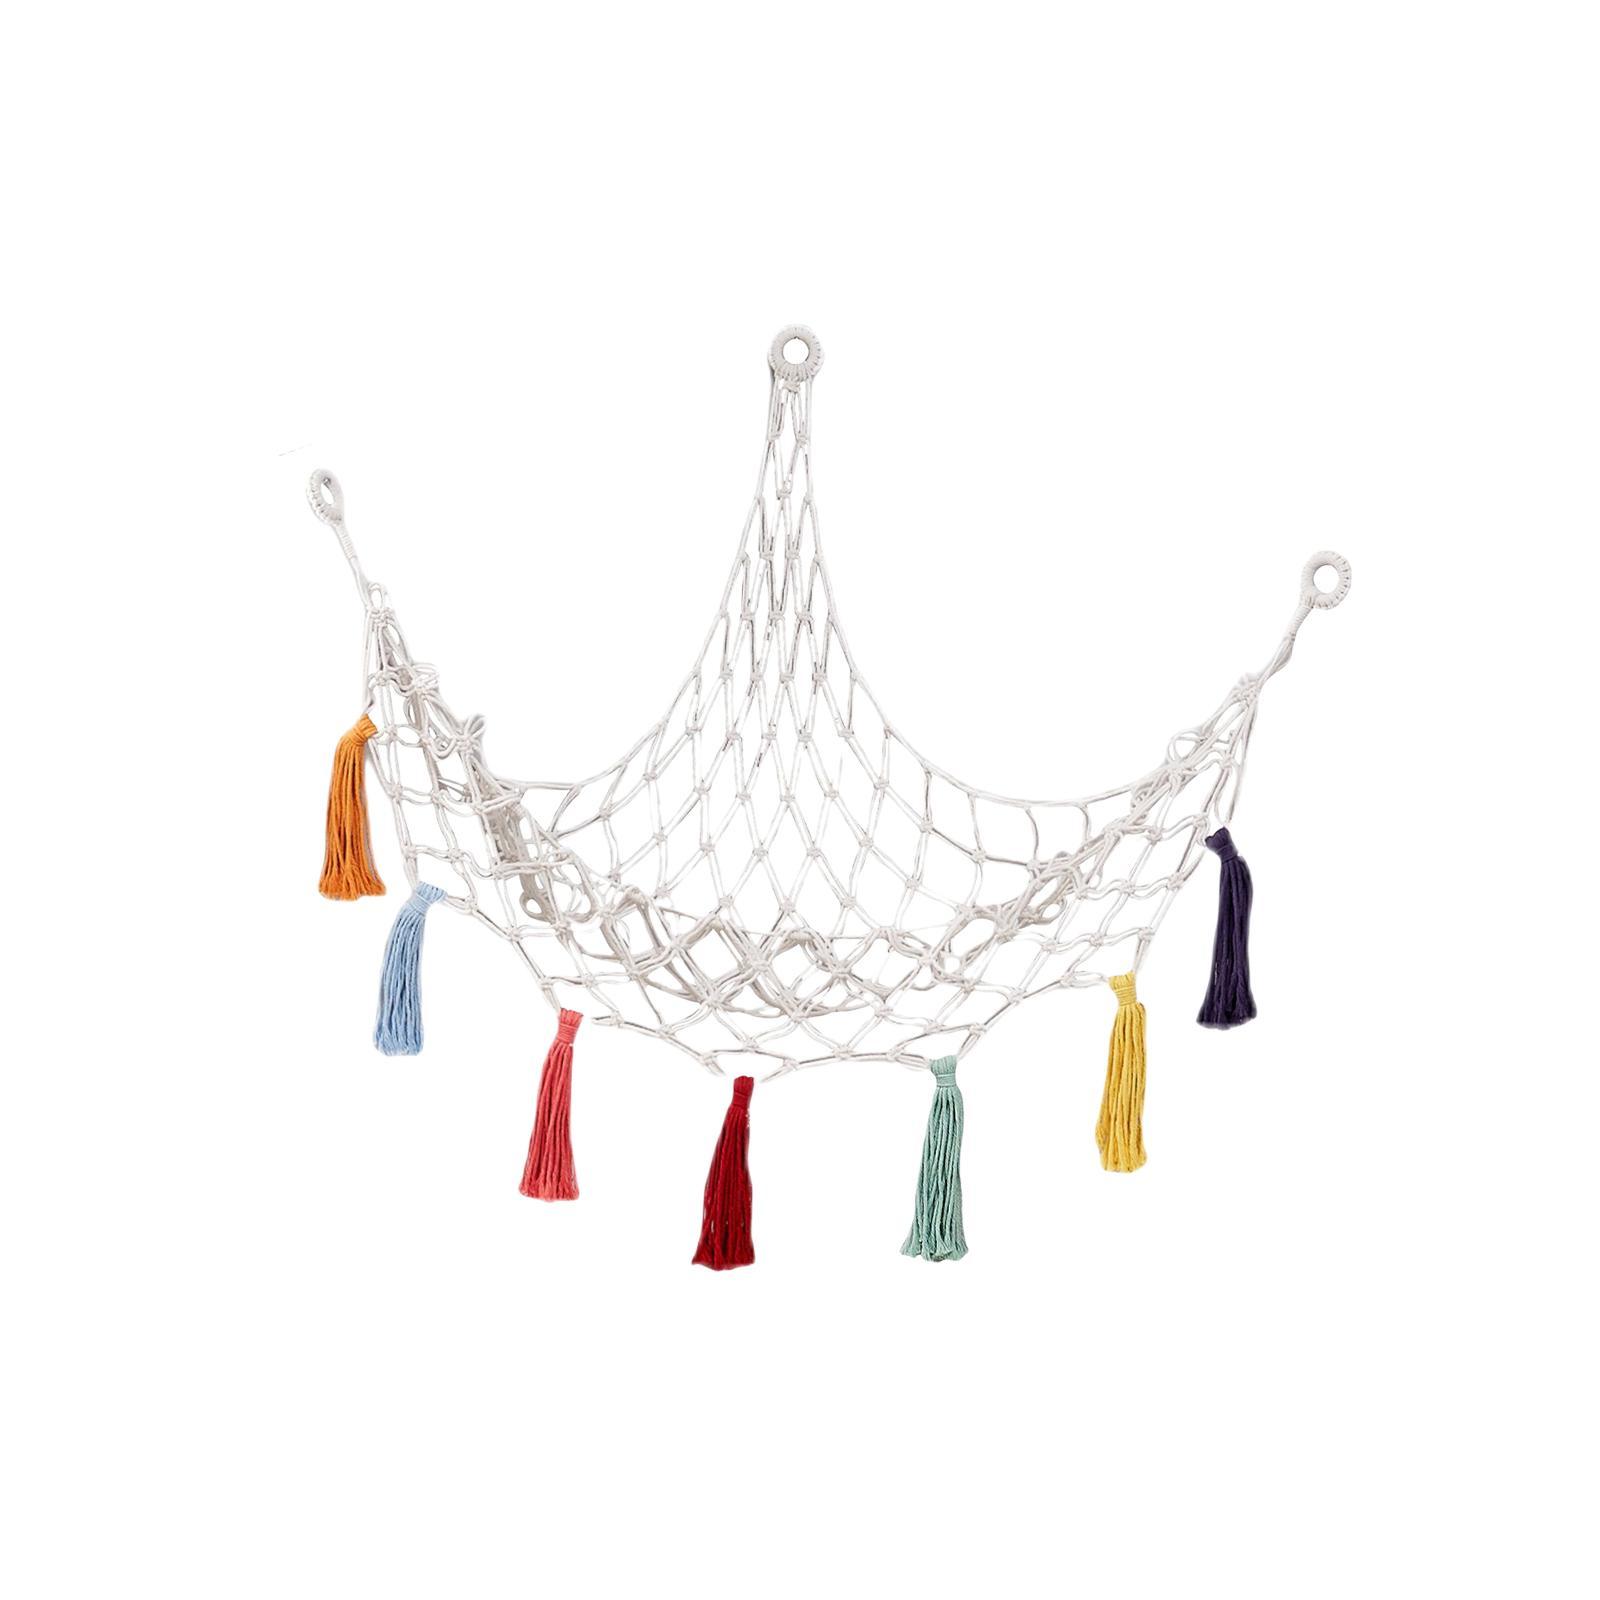 Creative Toy Hammock Wall Mounted Children Toy Holder with Tassels Decor